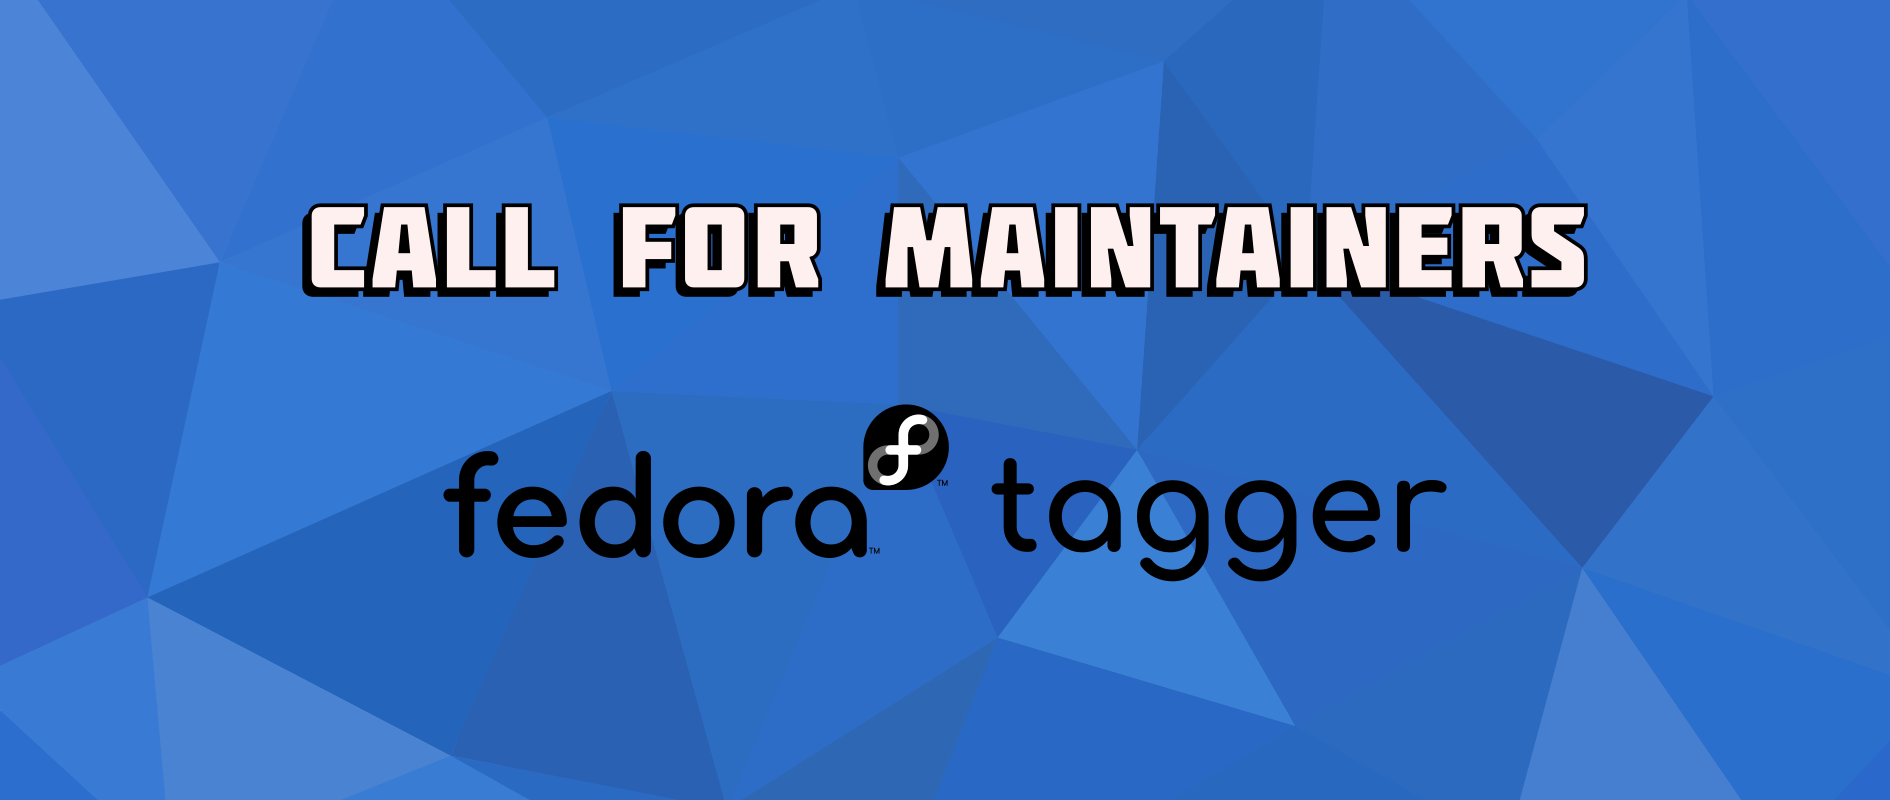 Call for maintainers: Fedora package tagger